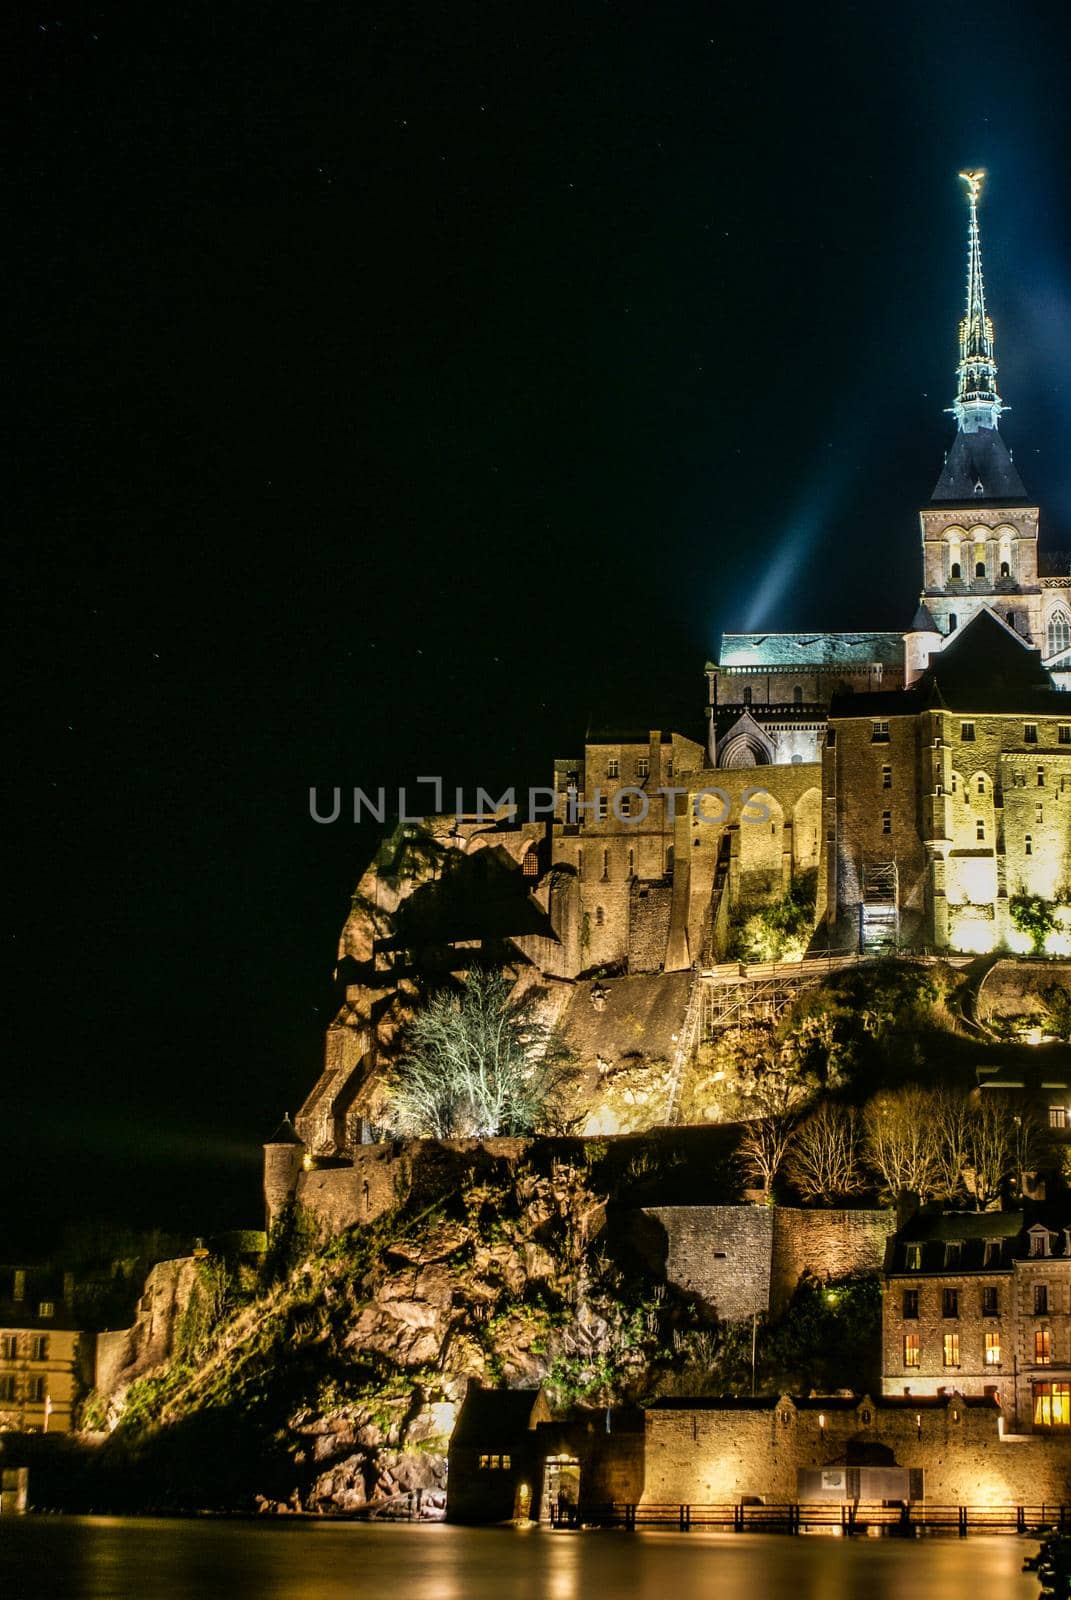 Night view of Mont-Saint Michel Lighted up. Shooting Location: France, Normandy Region